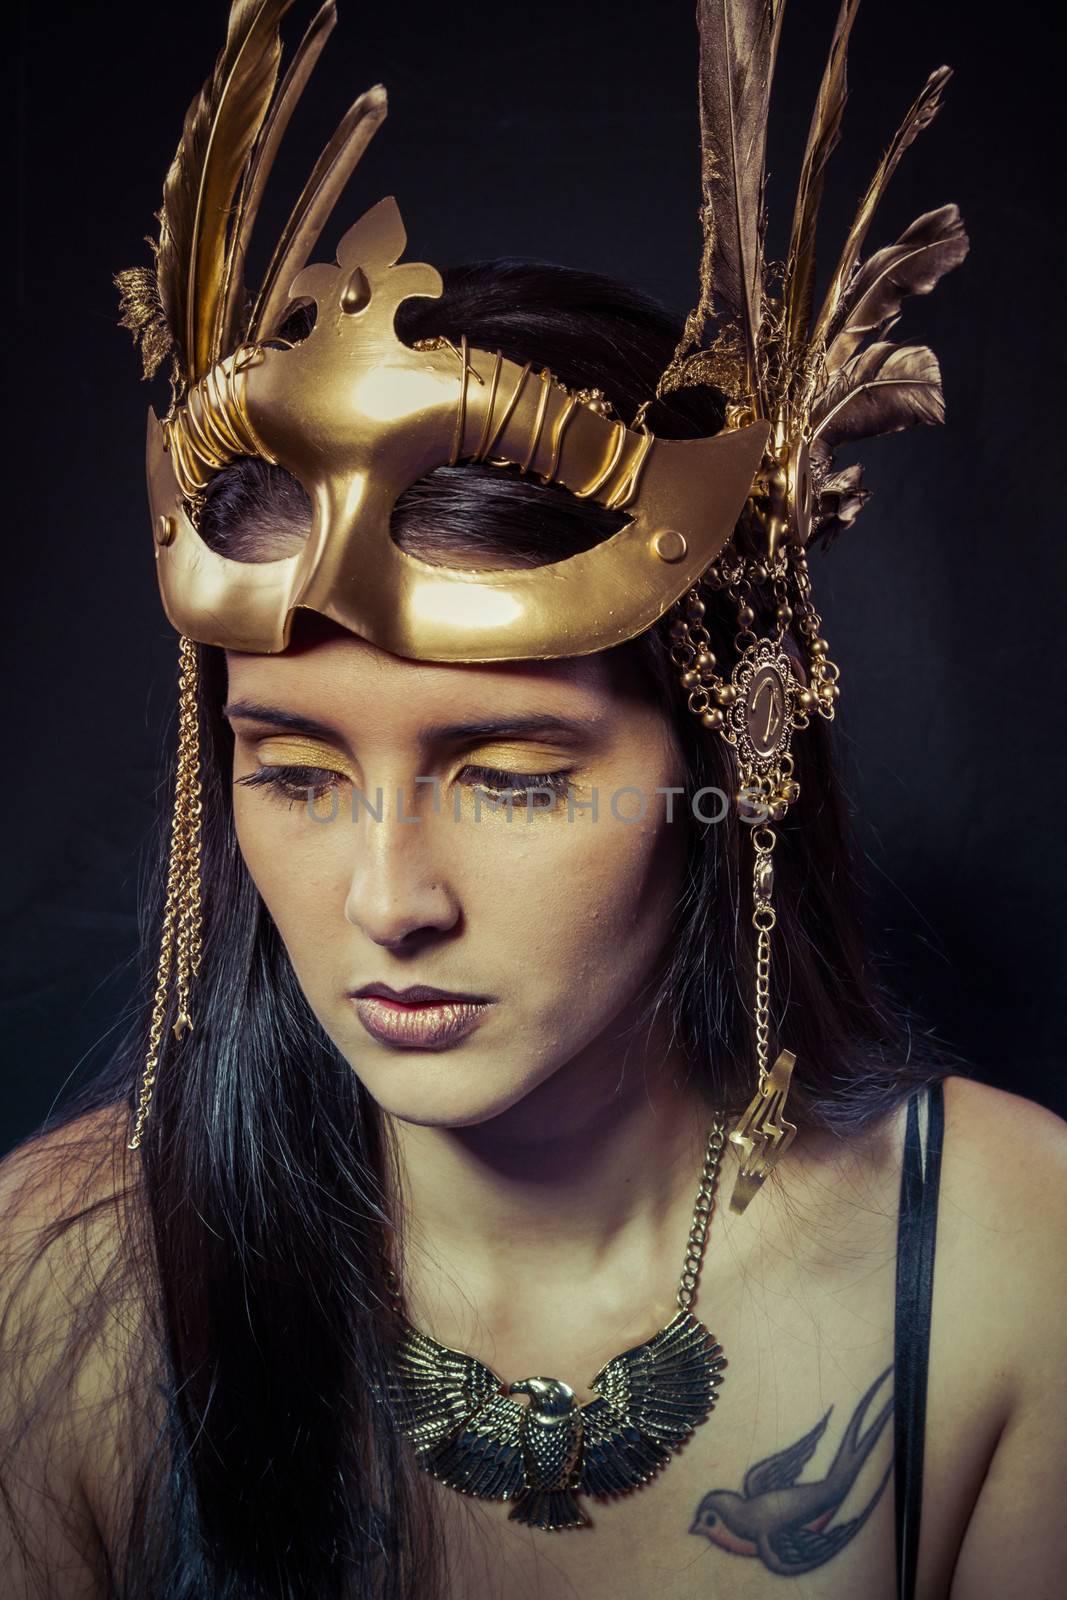 Tattoo, Warrior woman with gold mask, long hair brunette. Long h by FernandoCortes